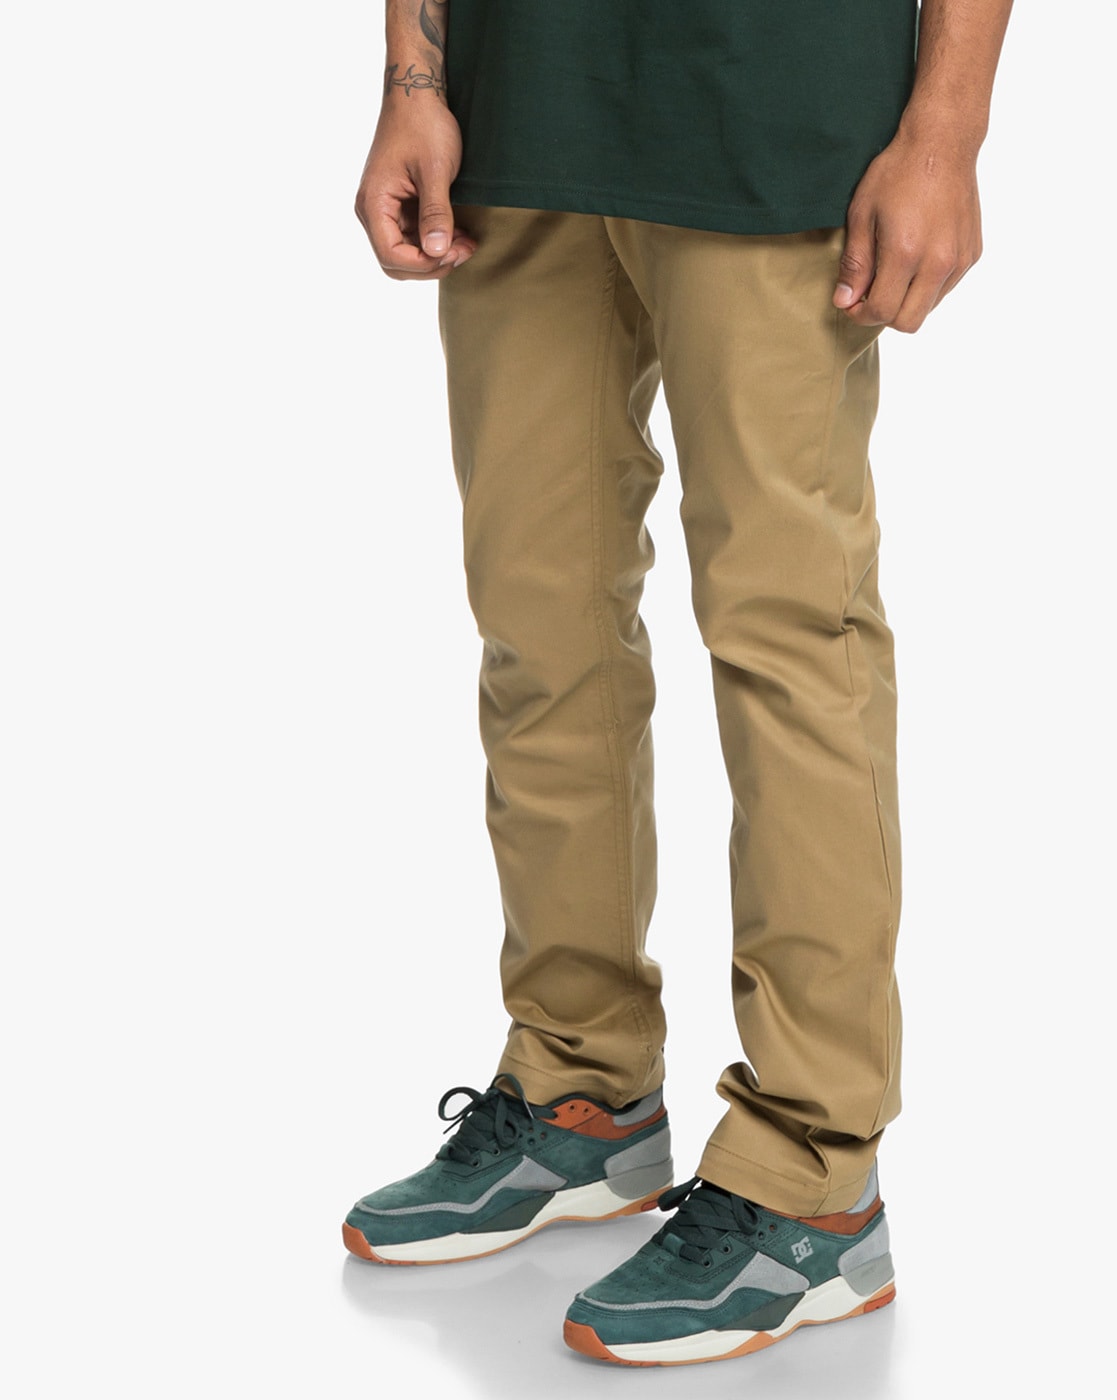 casual shoes with trousers